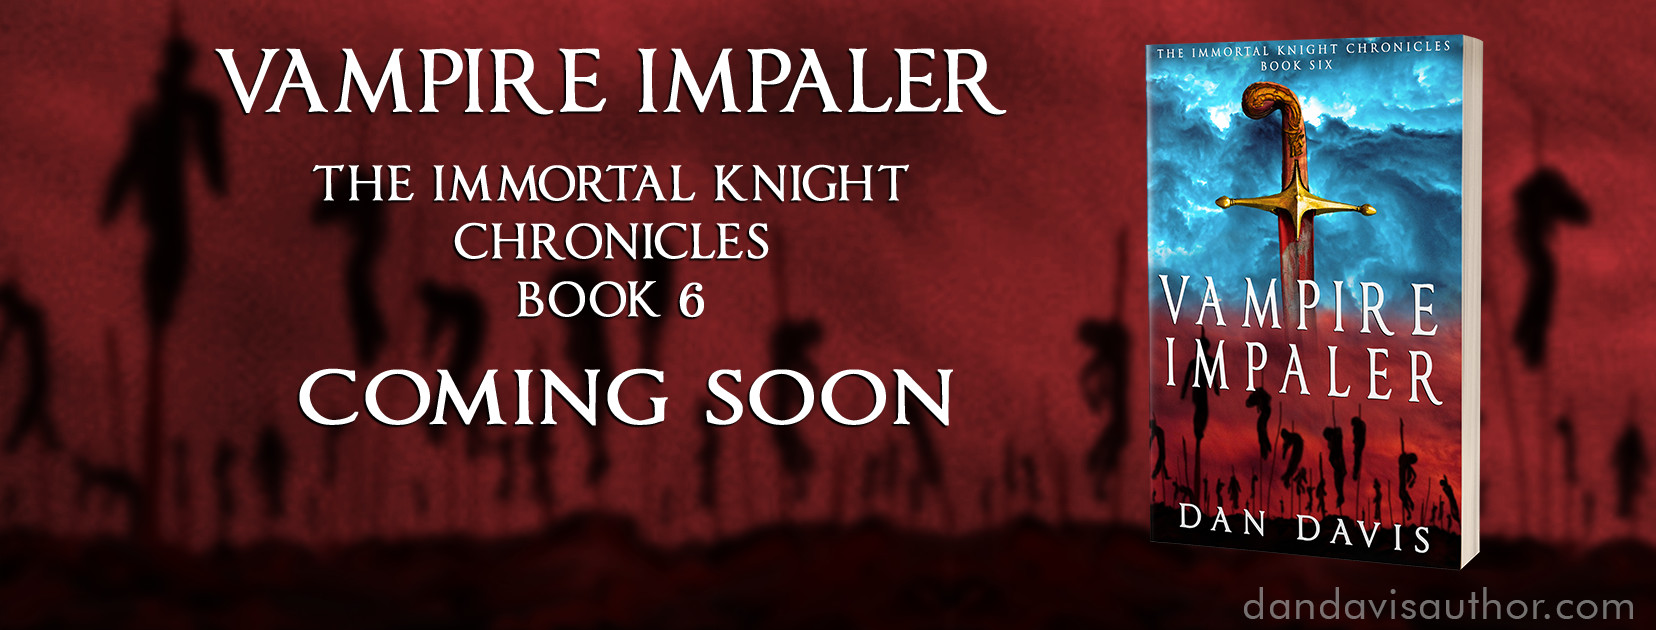 Vampire Impaler: the Immortal Knight Chronicles Book 6 – coming soon!